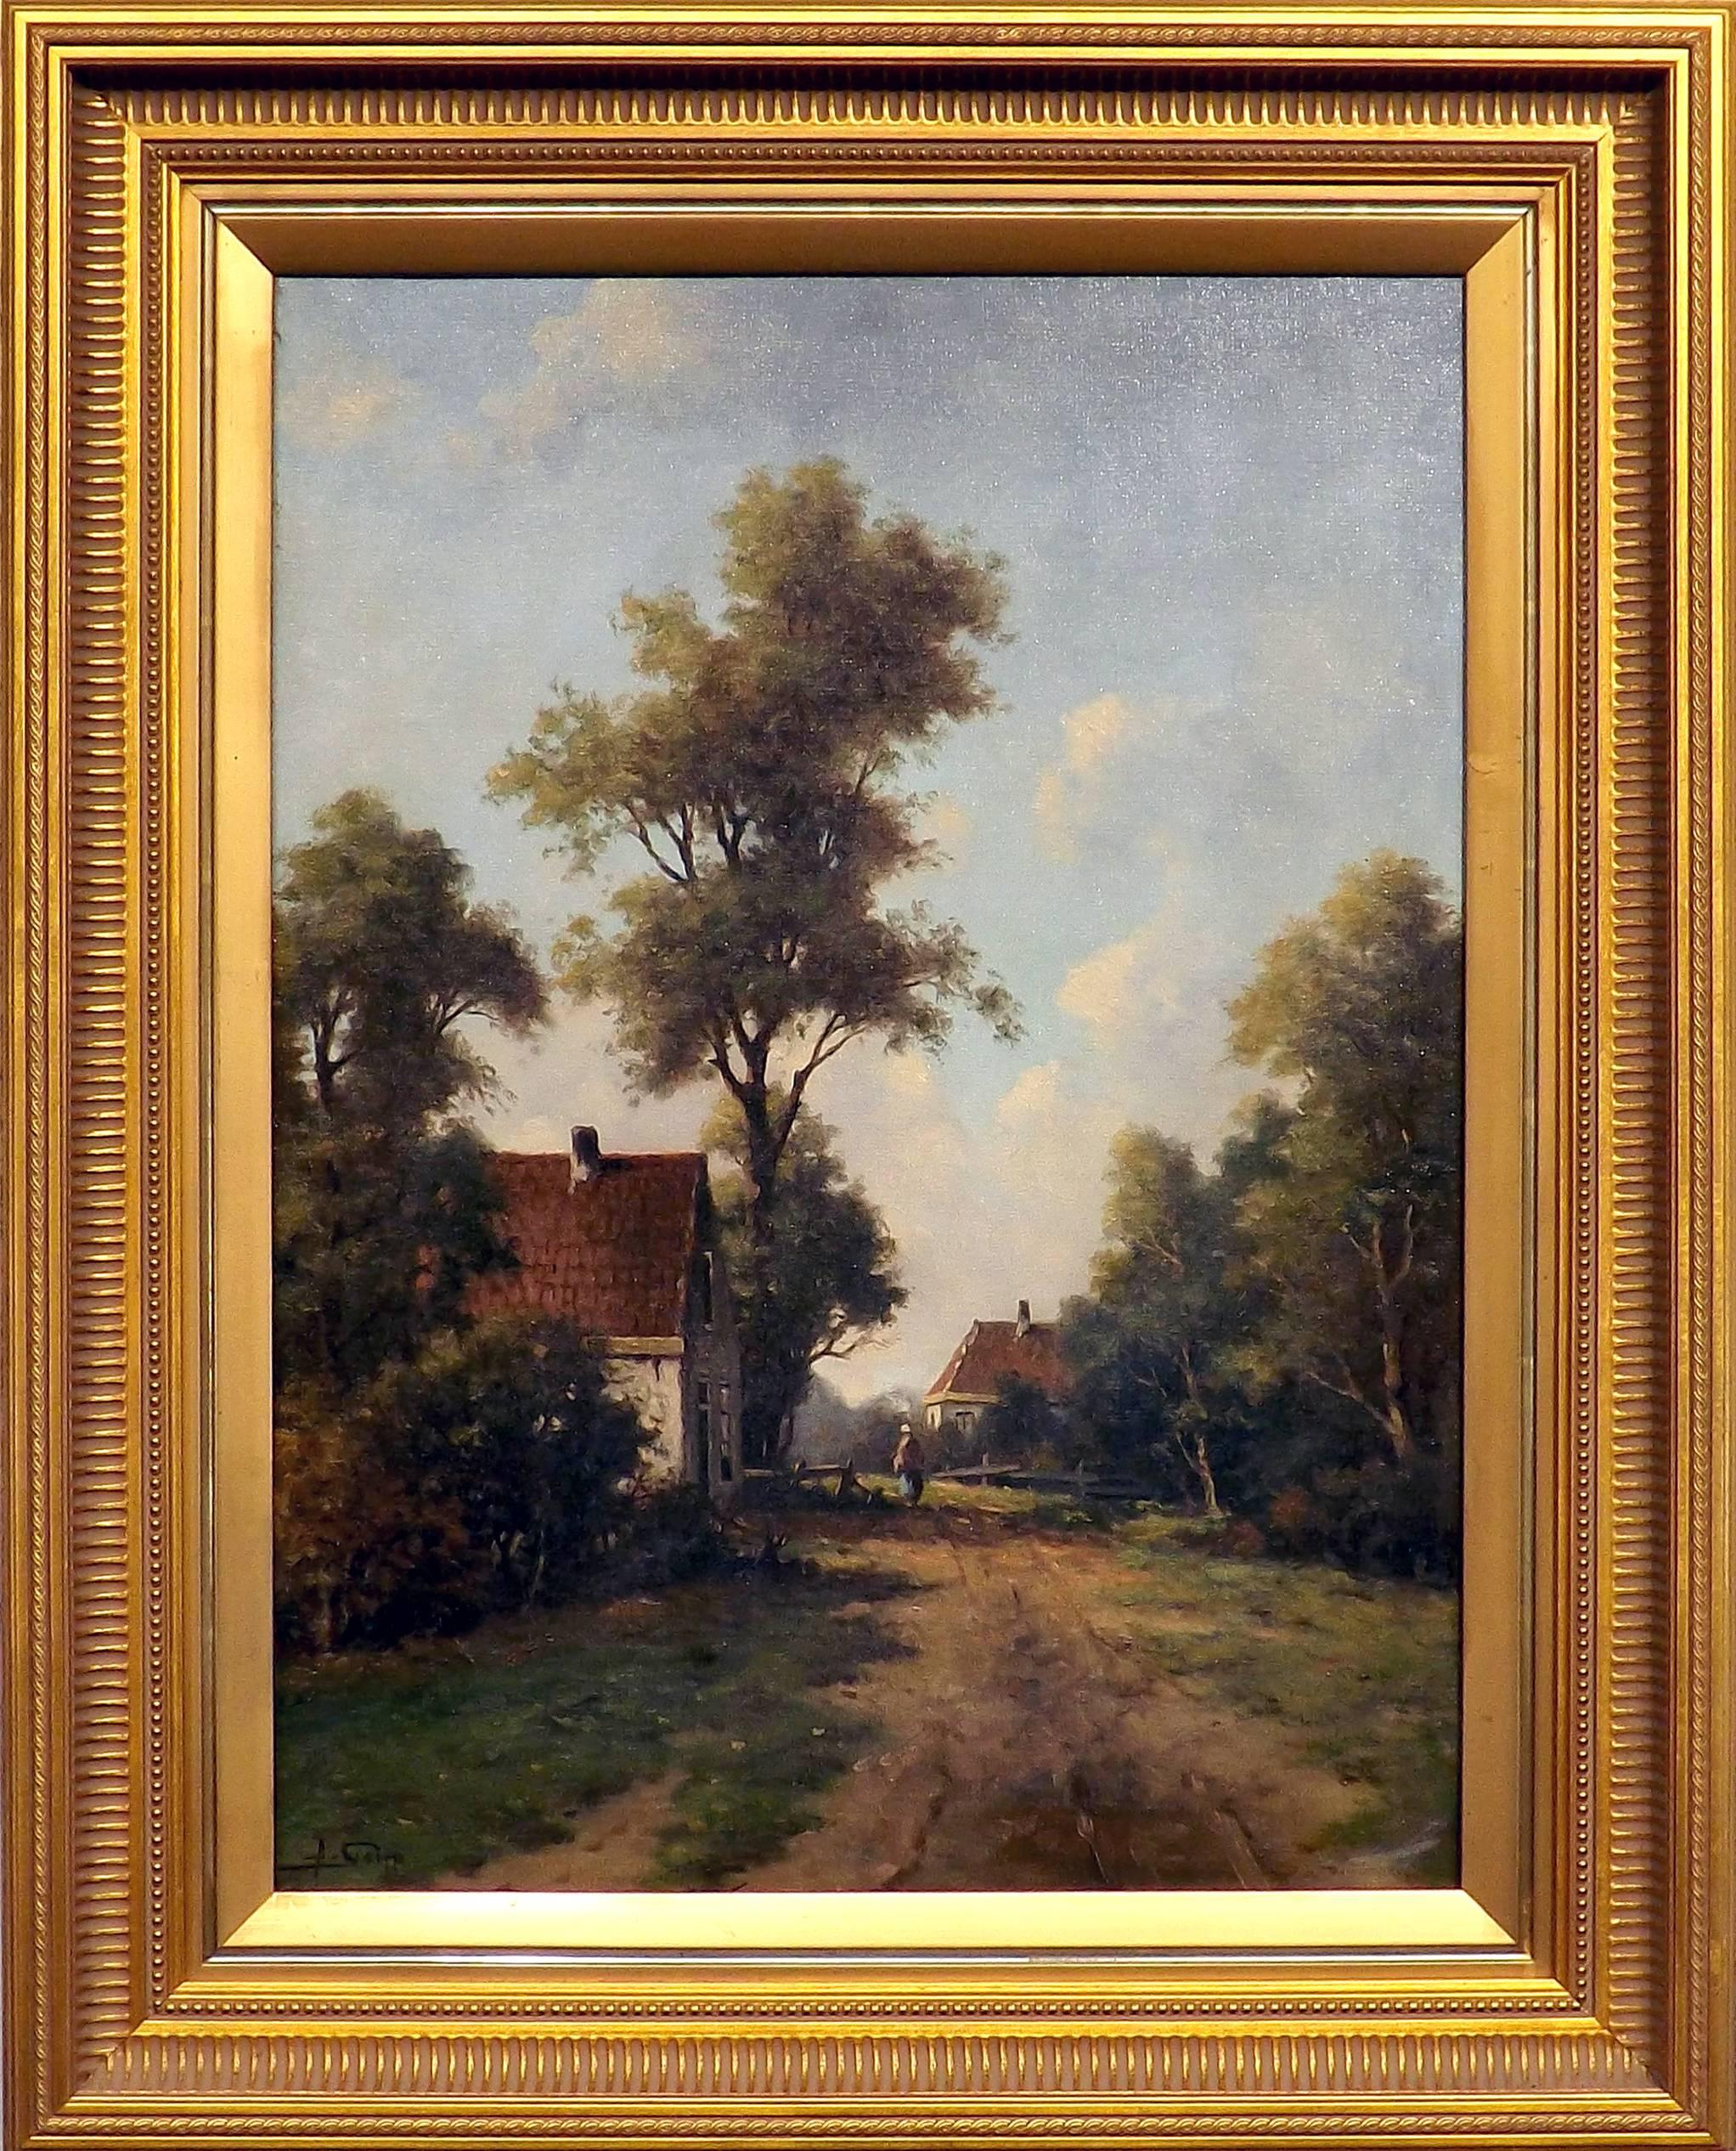 A classical Dutch oil on canvas painting of a solitary figure walking upon an old dirt road, somewhere in the heartland of Holland. Adriaan Marinus Geijp (1855-1926) was born in Middelburg, The Netherlands in 1855. Originally a decorative artist, he